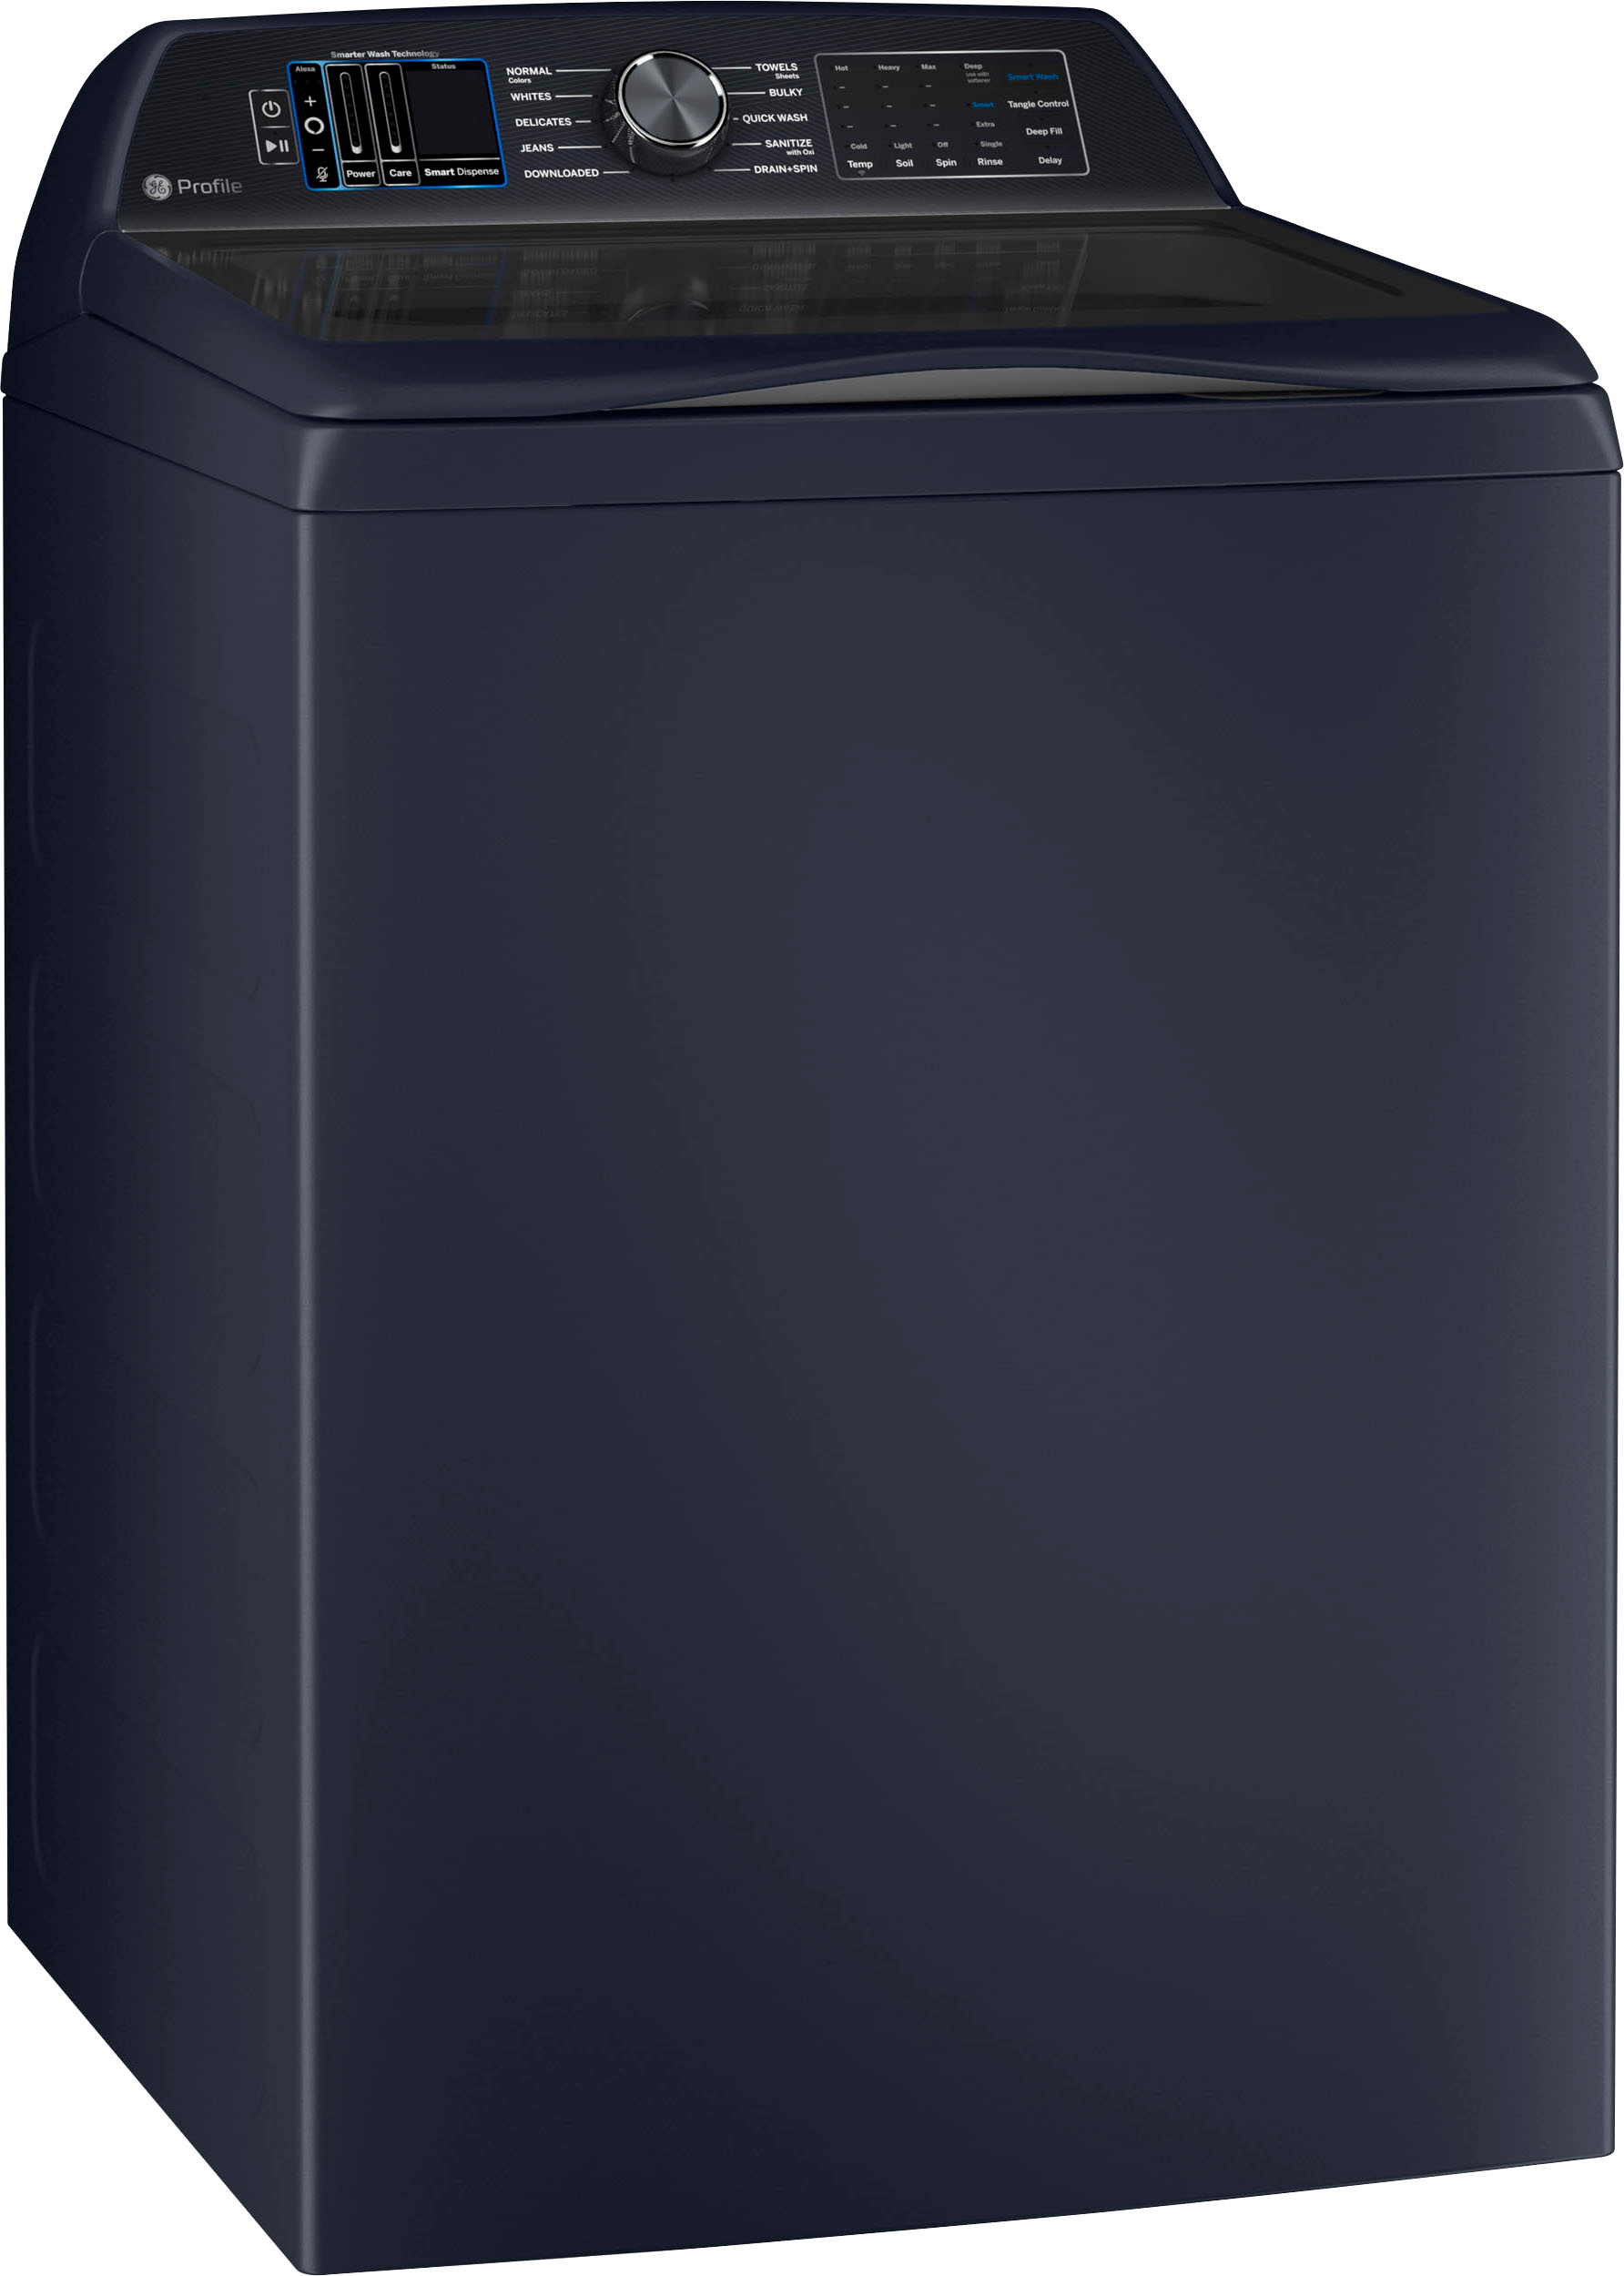 Angle View: GE Profile - 5.4 Cu. Ft. High Efficiency Top Load Washer with Smarter Wash Technology, Easier Reach & Microban Technology - Sapphire Blue